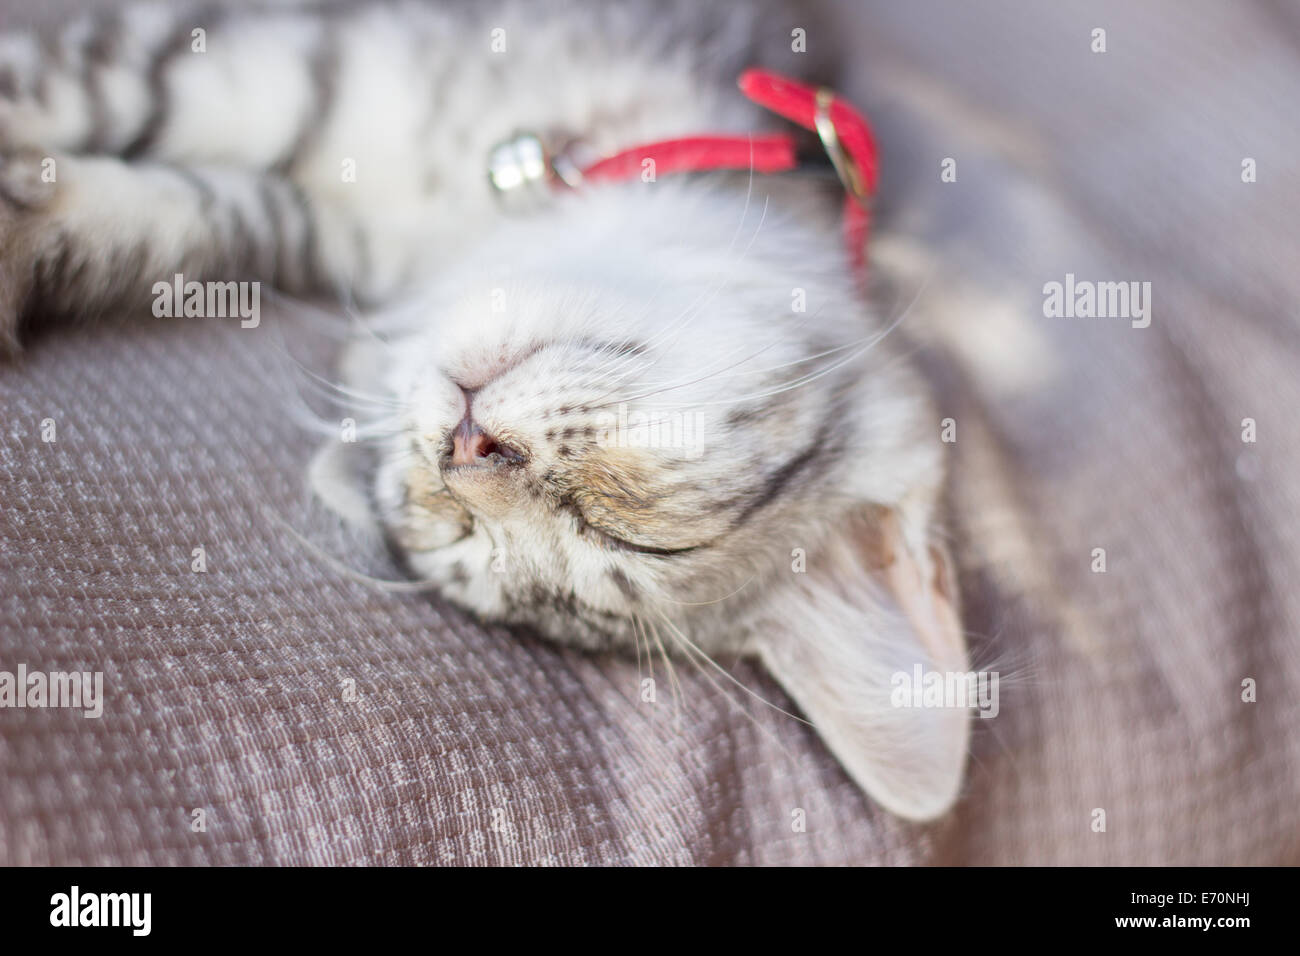 Kitty Cat face portrait sleeping Banque D'Images